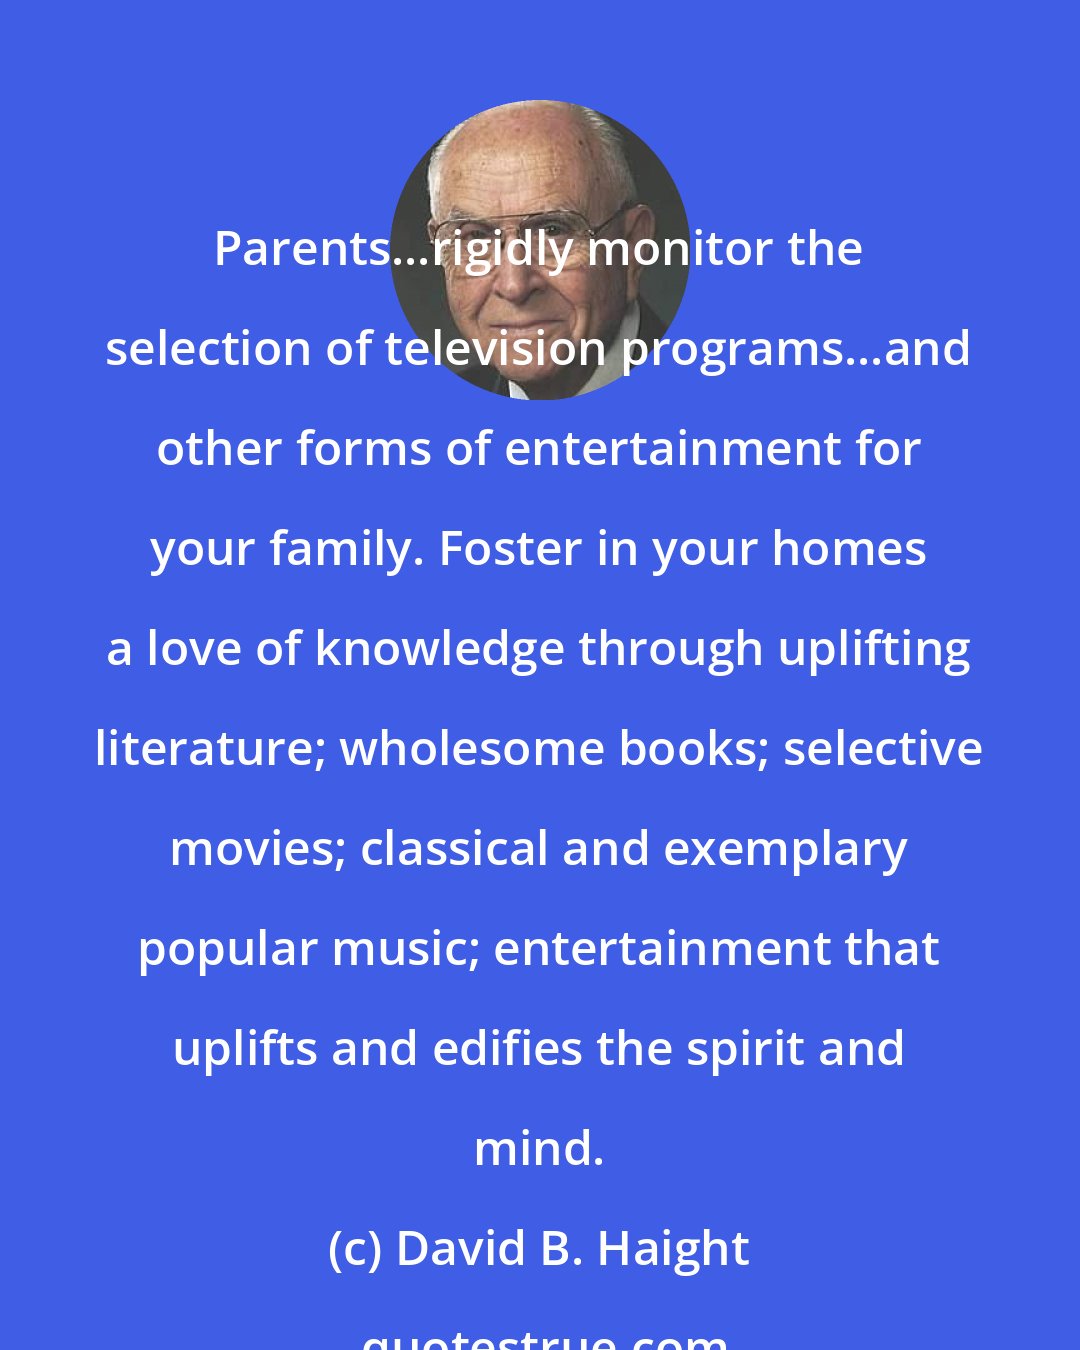 David B. Haight: Parents...rigidly monitor the selection of television programs...and other forms of entertainment for your family. Foster in your homes a love of knowledge through uplifting literature; wholesome books; selective movies; classical and exemplary popular music; entertainment that uplifts and edifies the spirit and mind.